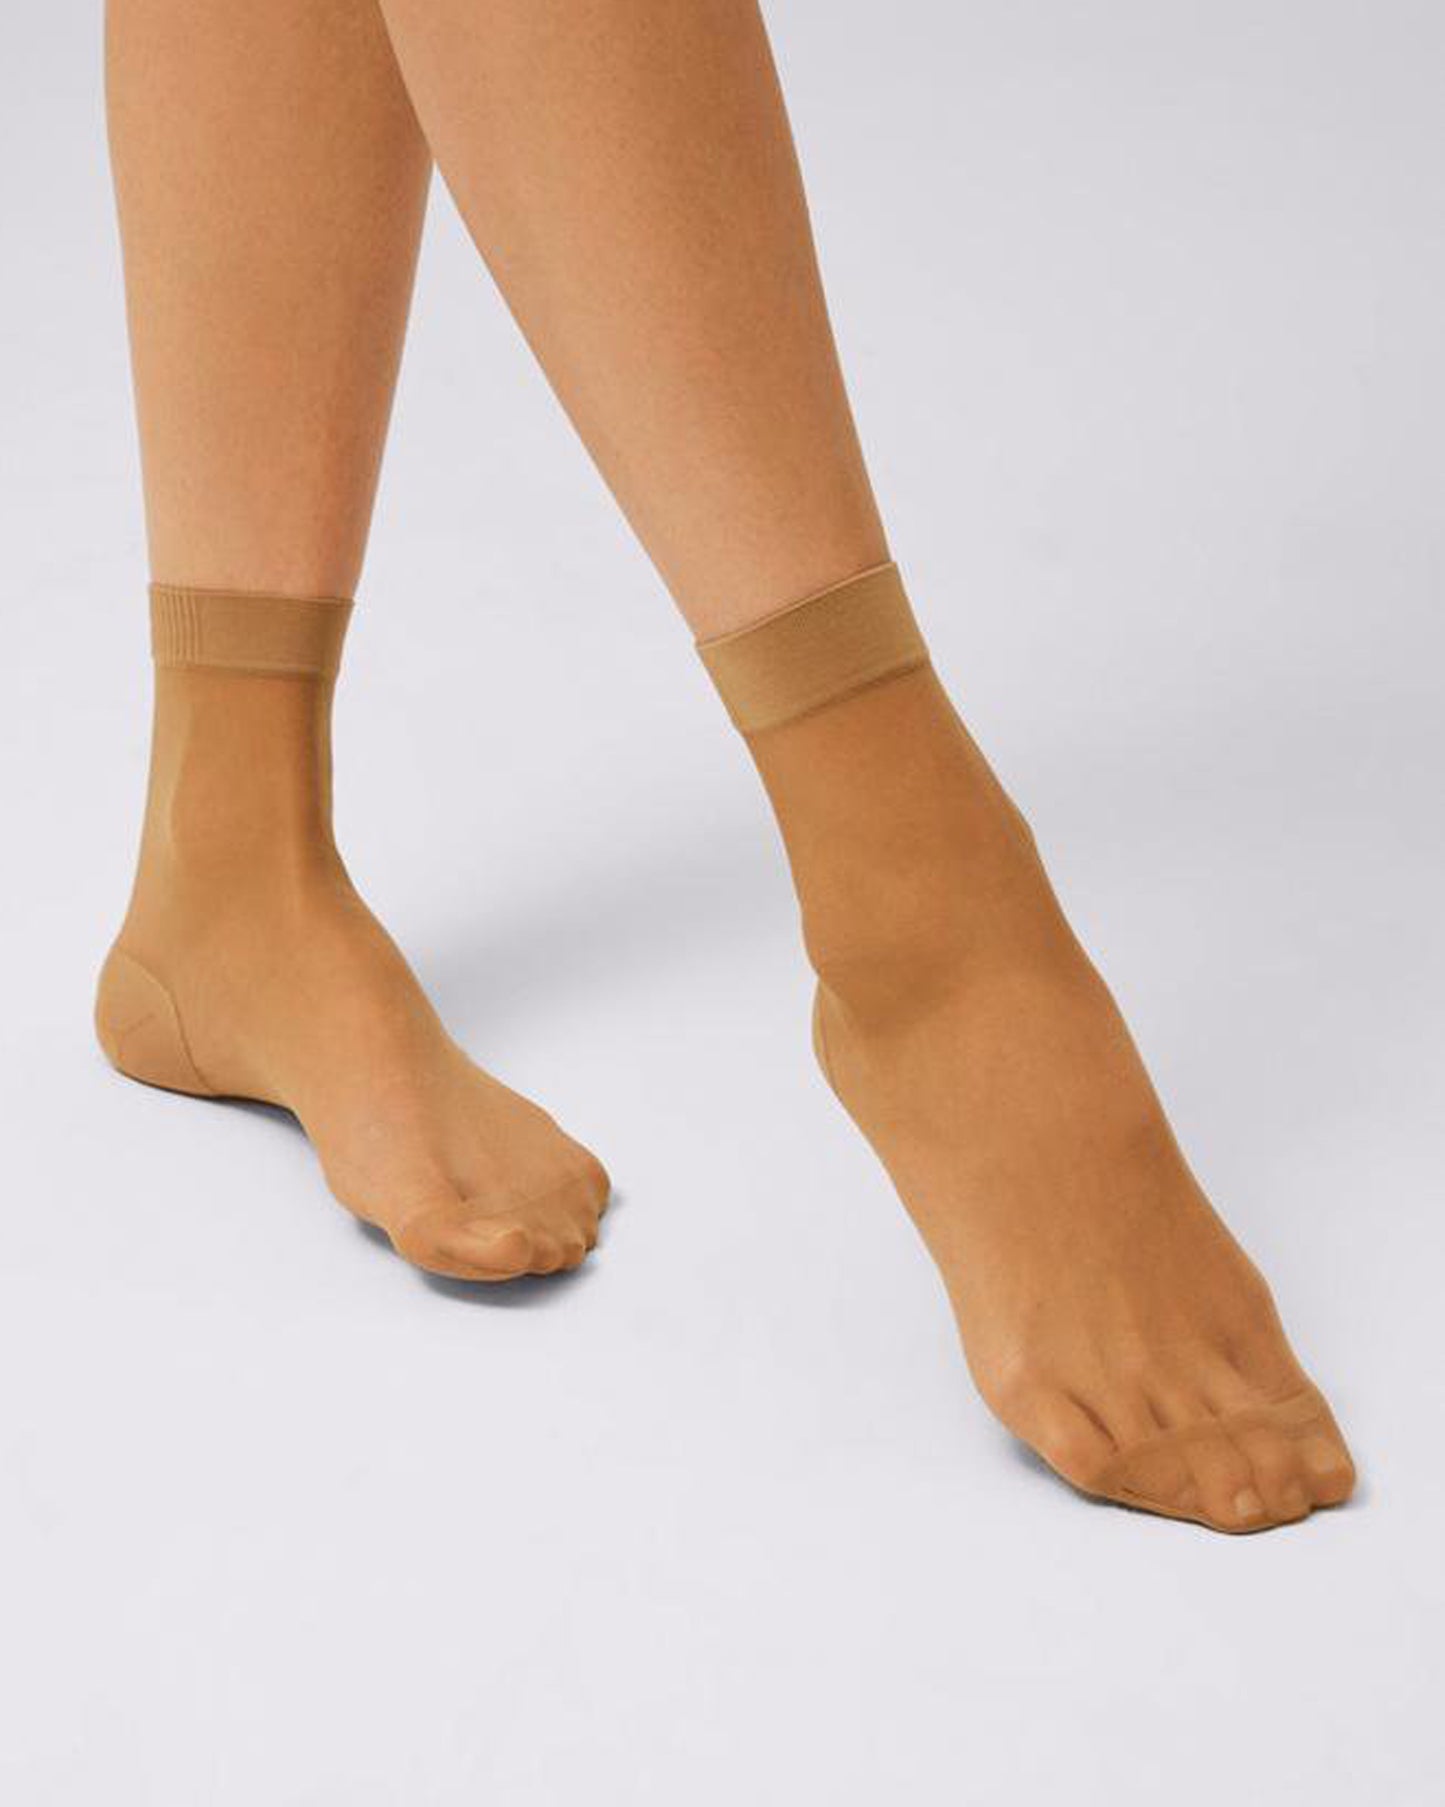 Ysabel Mora 18114 Sheer Reinforced Ankle Socks - Sheer tan ankle sock with an opaque reinforced toe and heel and soft ribbed anti-pressure comfort cuff.